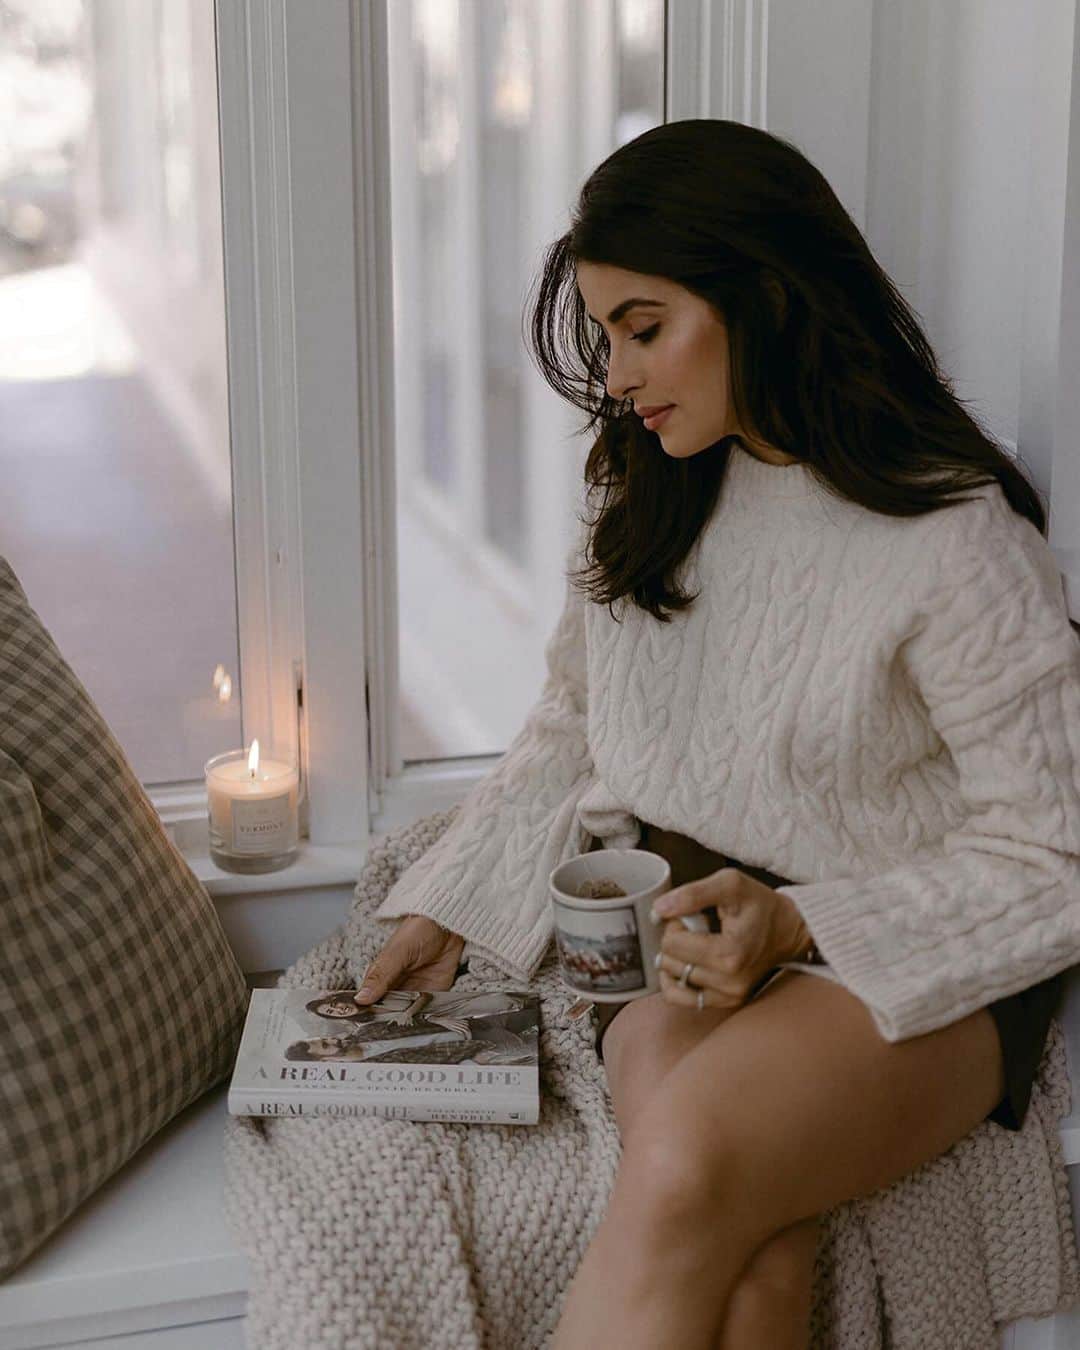 Sazan Hendrixのインスタグラム：「Hot apple cider tea paired with a good read 😌🍂 That’s what my soul needs on this gloomy fall day in Austin 🌧️   2 weeks since the birth of the new book and it’s been really cool watching you journey through ✨A Real Good Life✨ It’s given me FOMO so I’m re-reading from the beginning now 😂 and I’ve always wanted to be apart of a book club - shall we start one fam?  I just finished the introduction and first two chapters. There’s a cozy vibe when I read now knowing the book is finally out and the nerves have calmed down.lol Lmk where you are in the read and what’s been your favorite thing so far!!😍 #arealgoodlifebook #cozyfallday #readmorebooks」